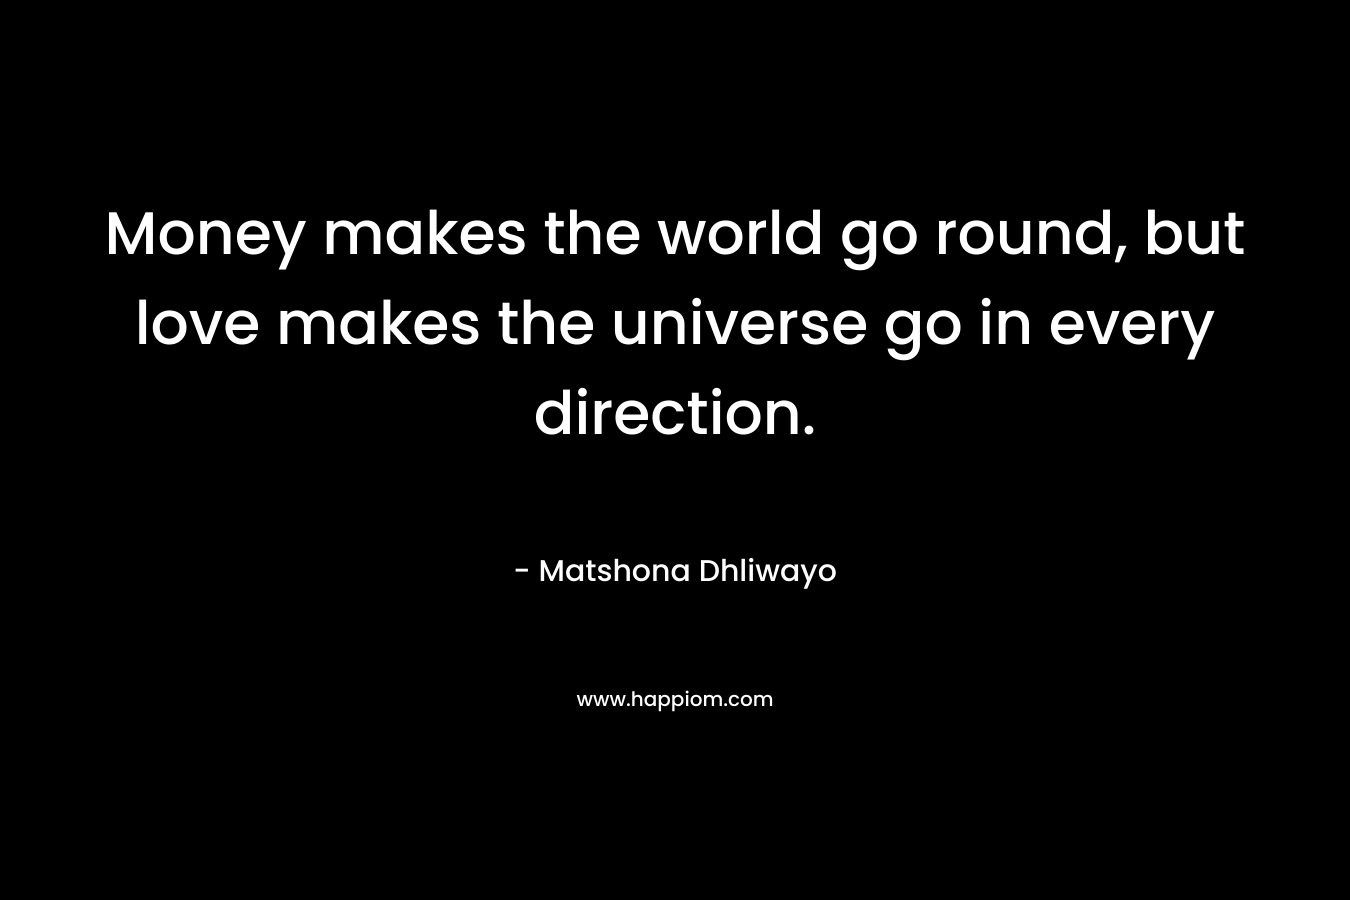 Money makes the world go round, but love makes the universe go in every direction. – Matshona Dhliwayo